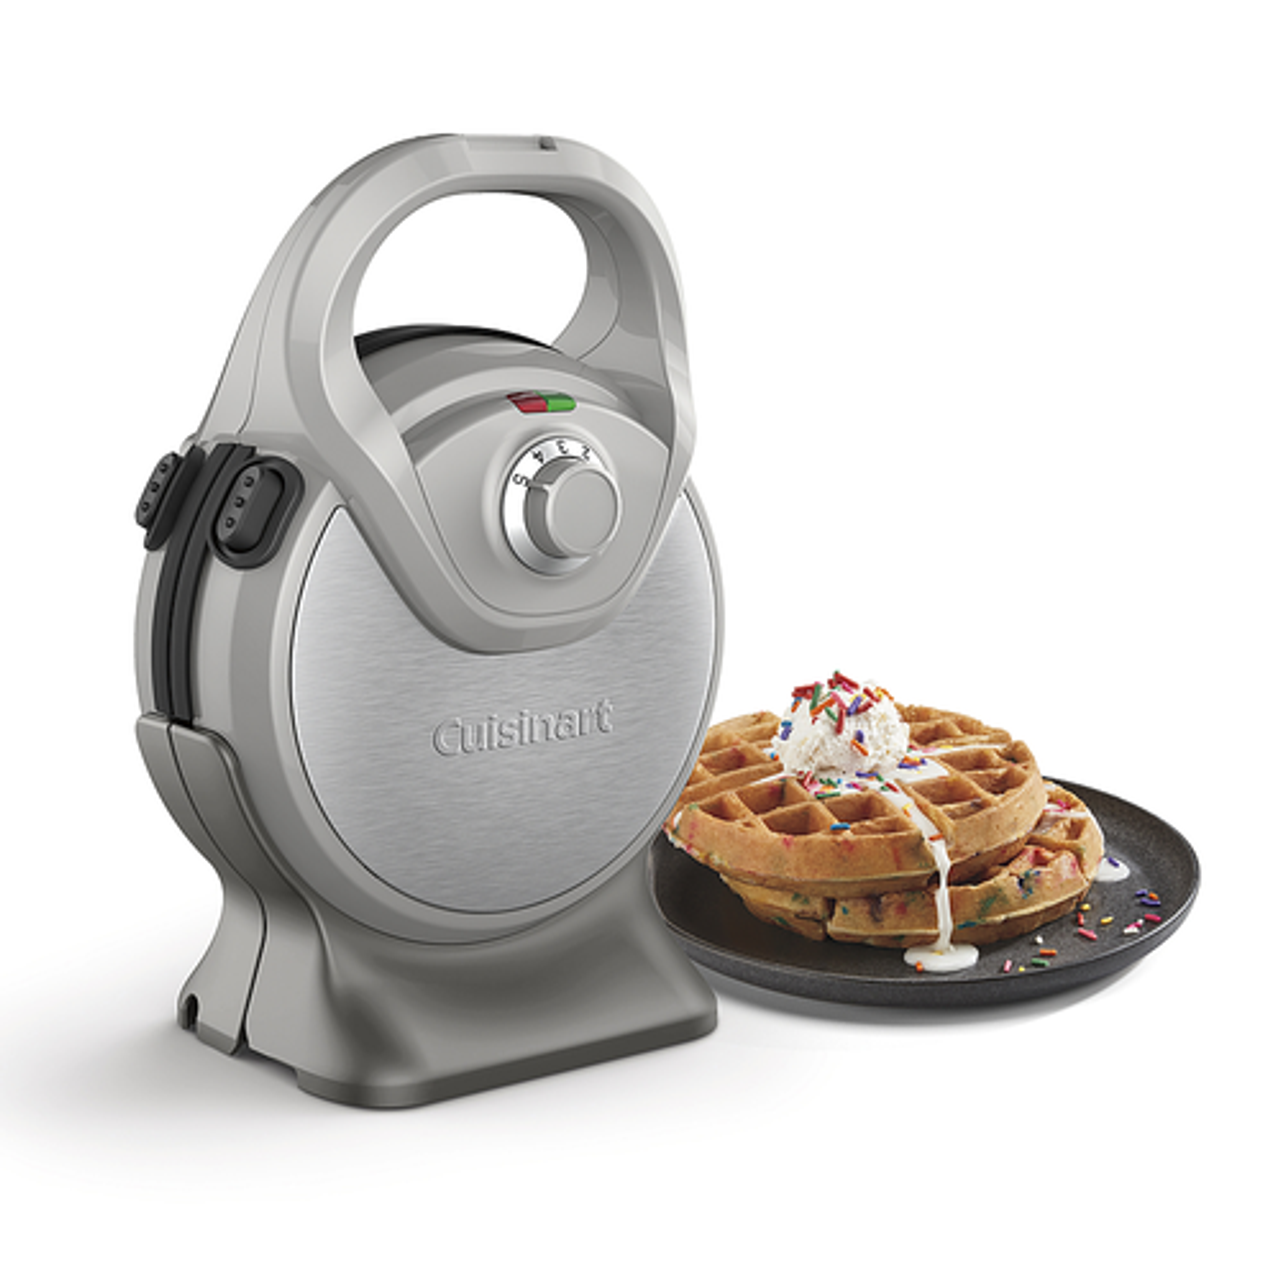 Cuisinart - 2-in-1 Waffle Maker w Removable Plates - Stainless Steel & Multi-Colored